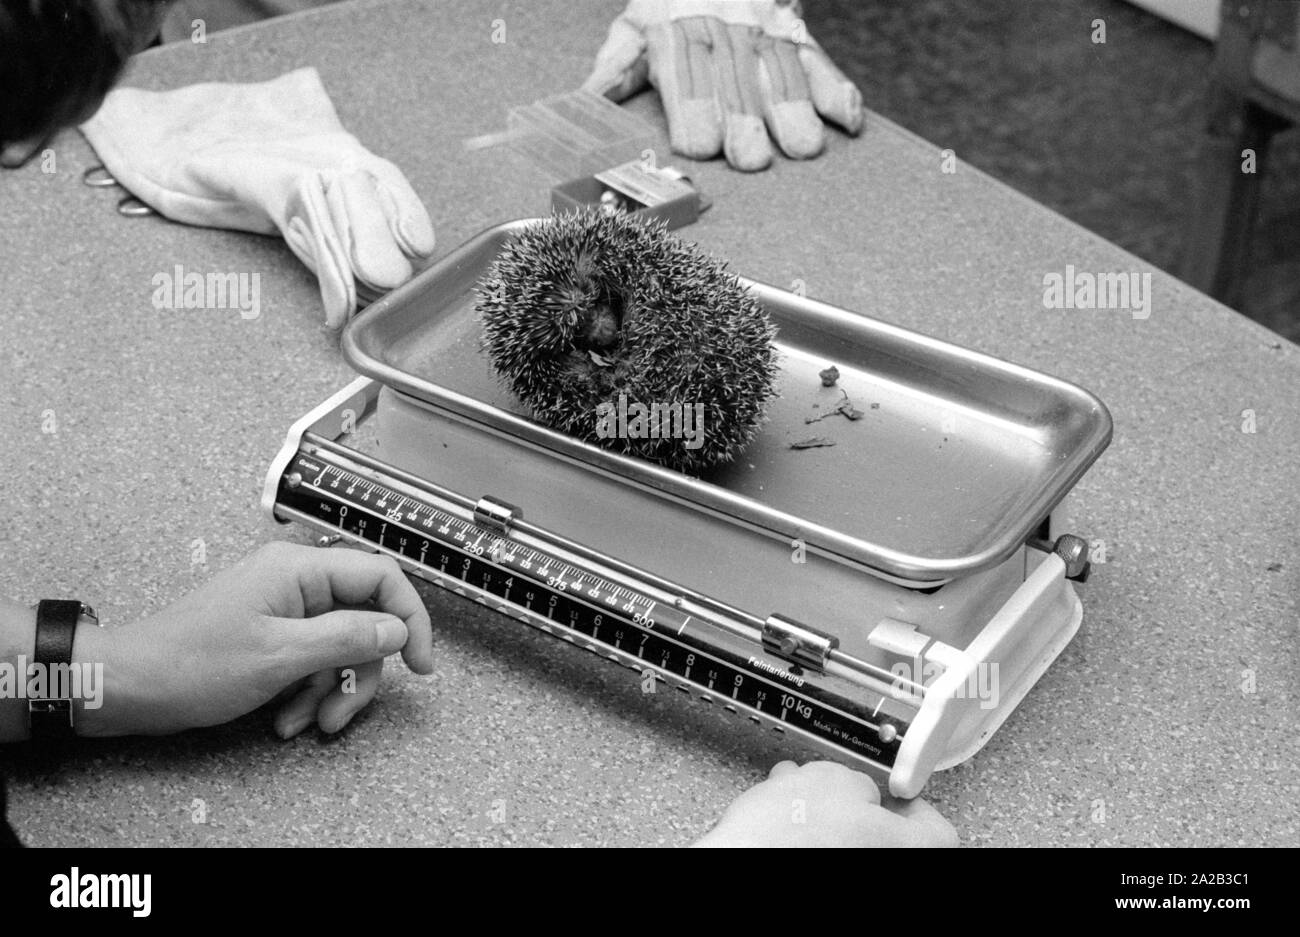 The employees of a hedgehog rescue center take care of newly found animals. The veterinarians take care of the health of the animals and with the center provide them a safe place for the wintering. The hedgehogs are examined and weighed. Stock Photo